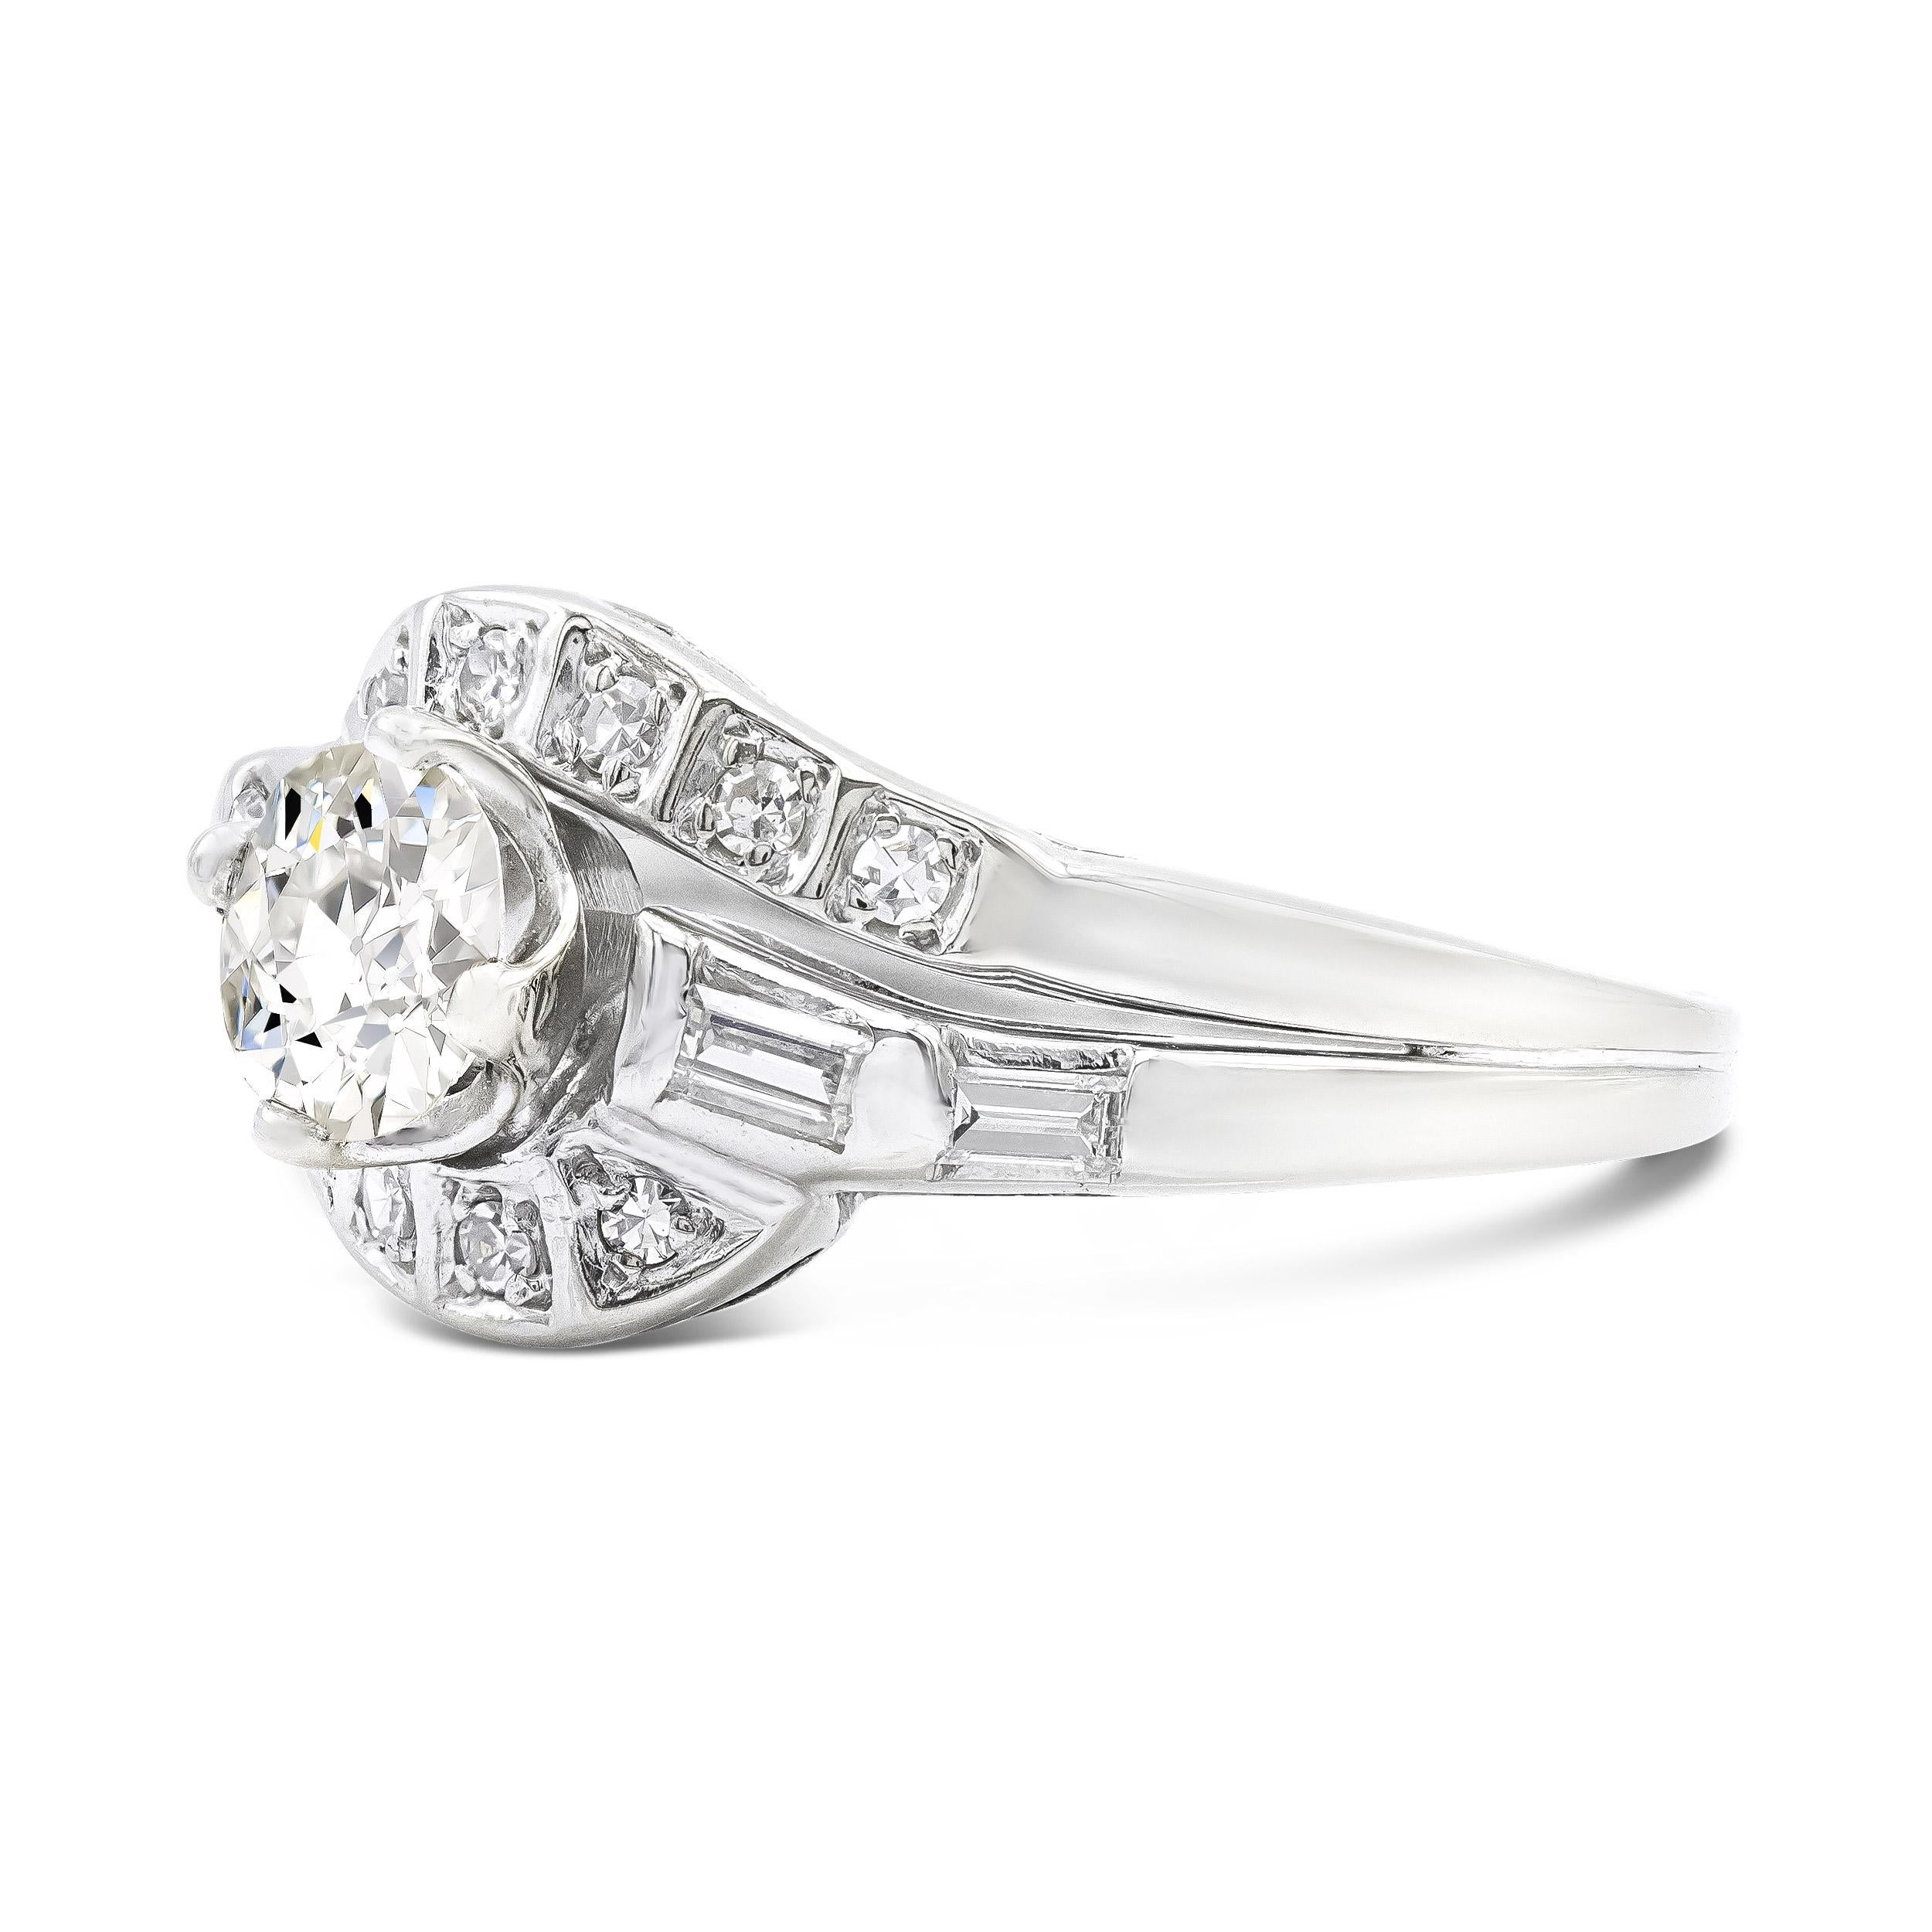 A brilliant 0.58 carat old European cut diamond centers this bypass style Art Deco engagement ring. Framed by a swirled diamond studded setting, the ring features white single cut and baguette accents fashioned in sleek platinum. This ring is made